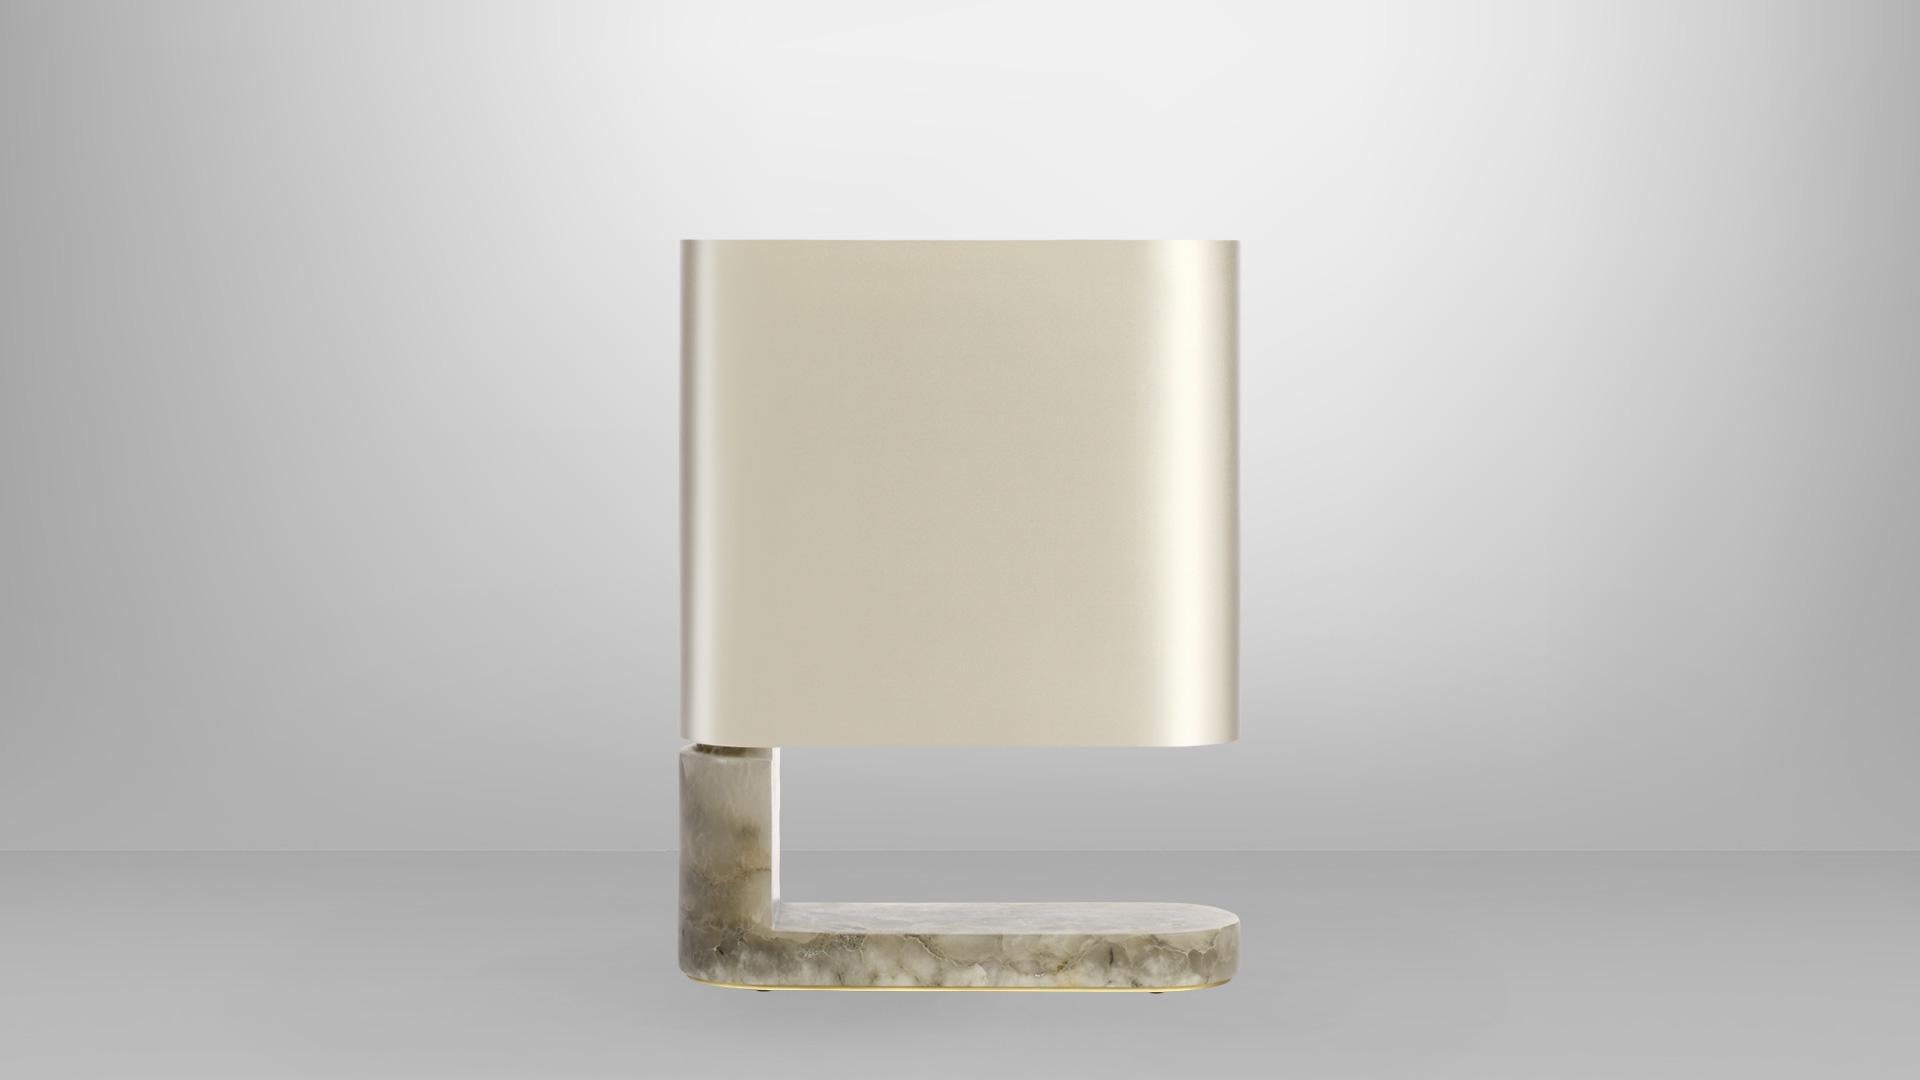 Alabaster Columbo Table Lamp by CTO Lighting
Materials: Grey alabaster with satin brass and dove grey silk shade
Dimensions: 33 x H 43.5 cm

All our lamps can be wired according to each country. If sold to the USA it will be wired for the USA